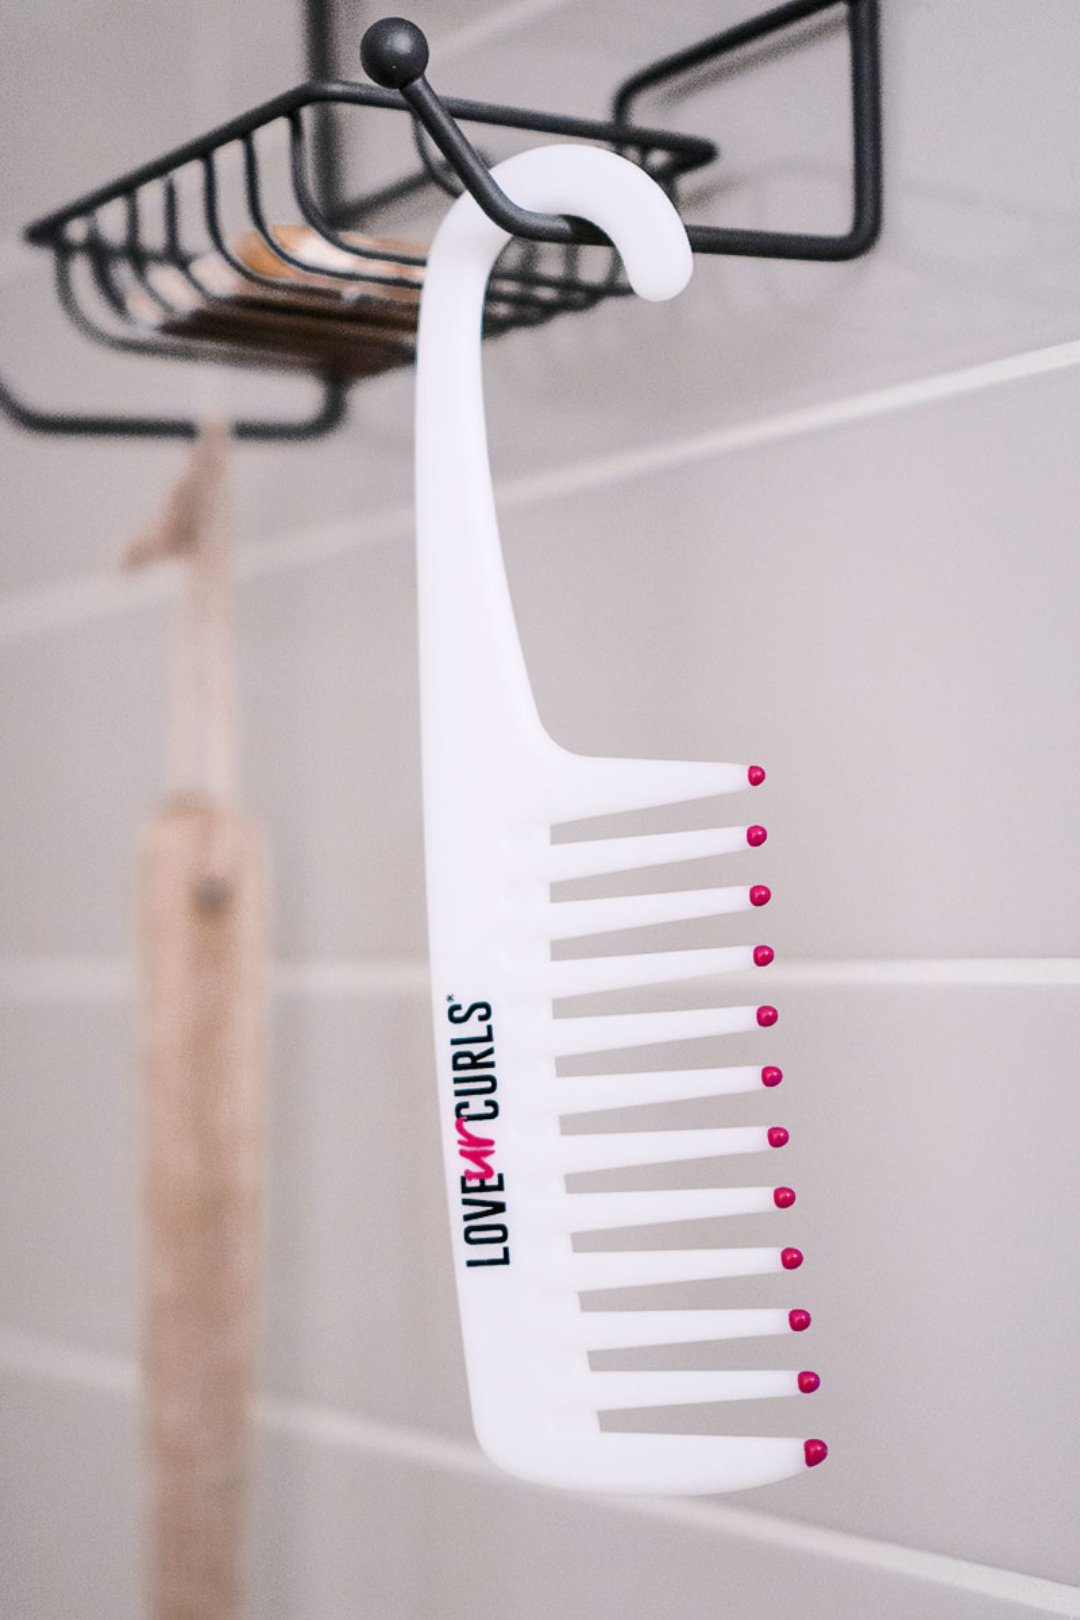 Wide Tooth Comb For Curly Hair - Big Shower Comb